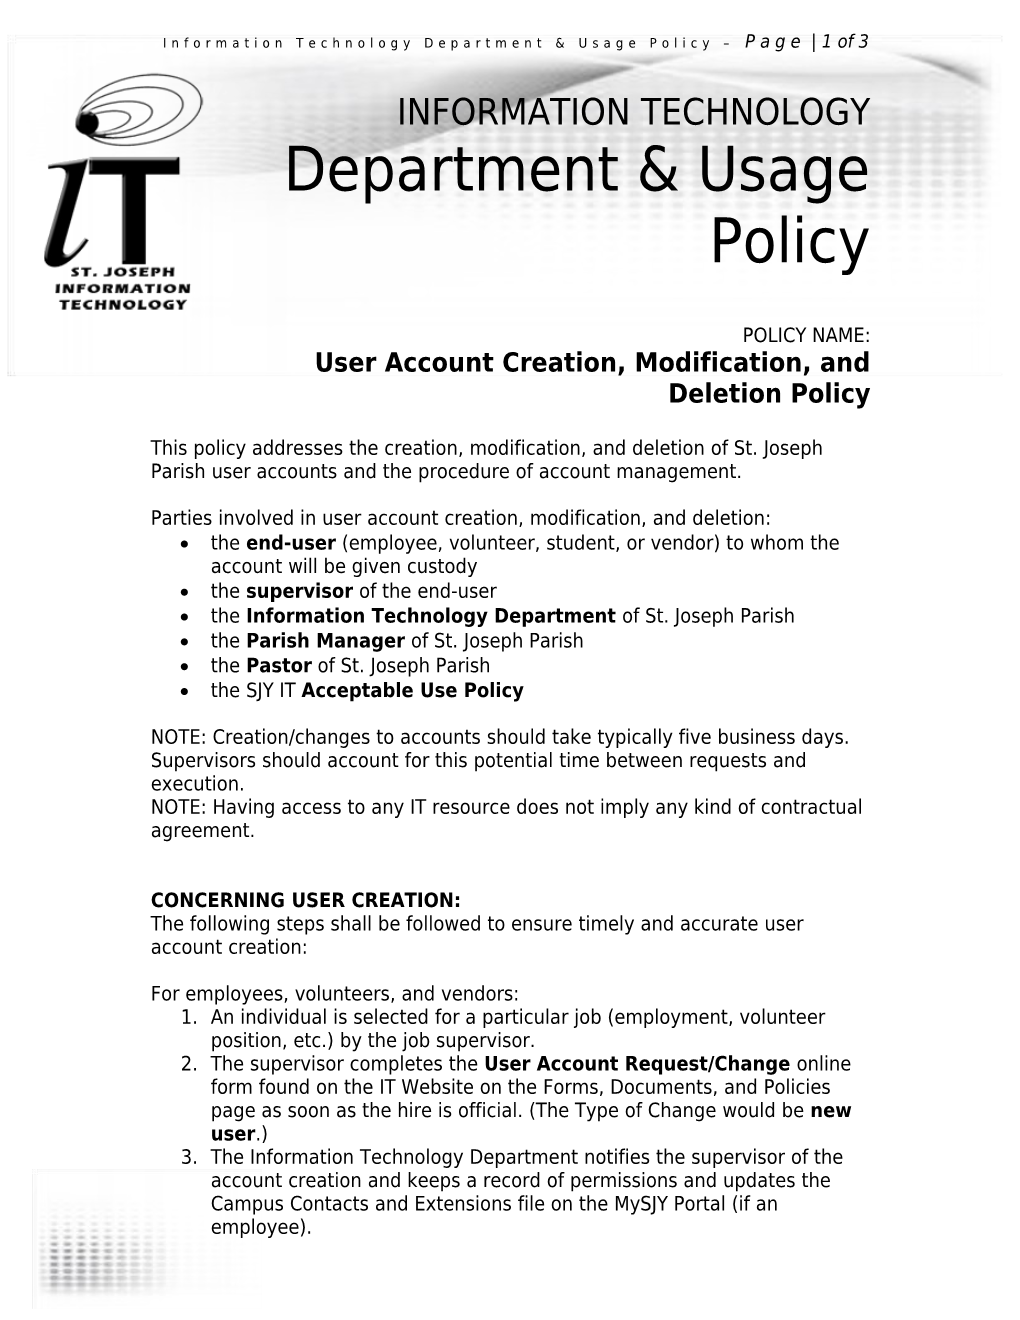 IT POLICY: User Account Creation, Modification, and Deletion Policy